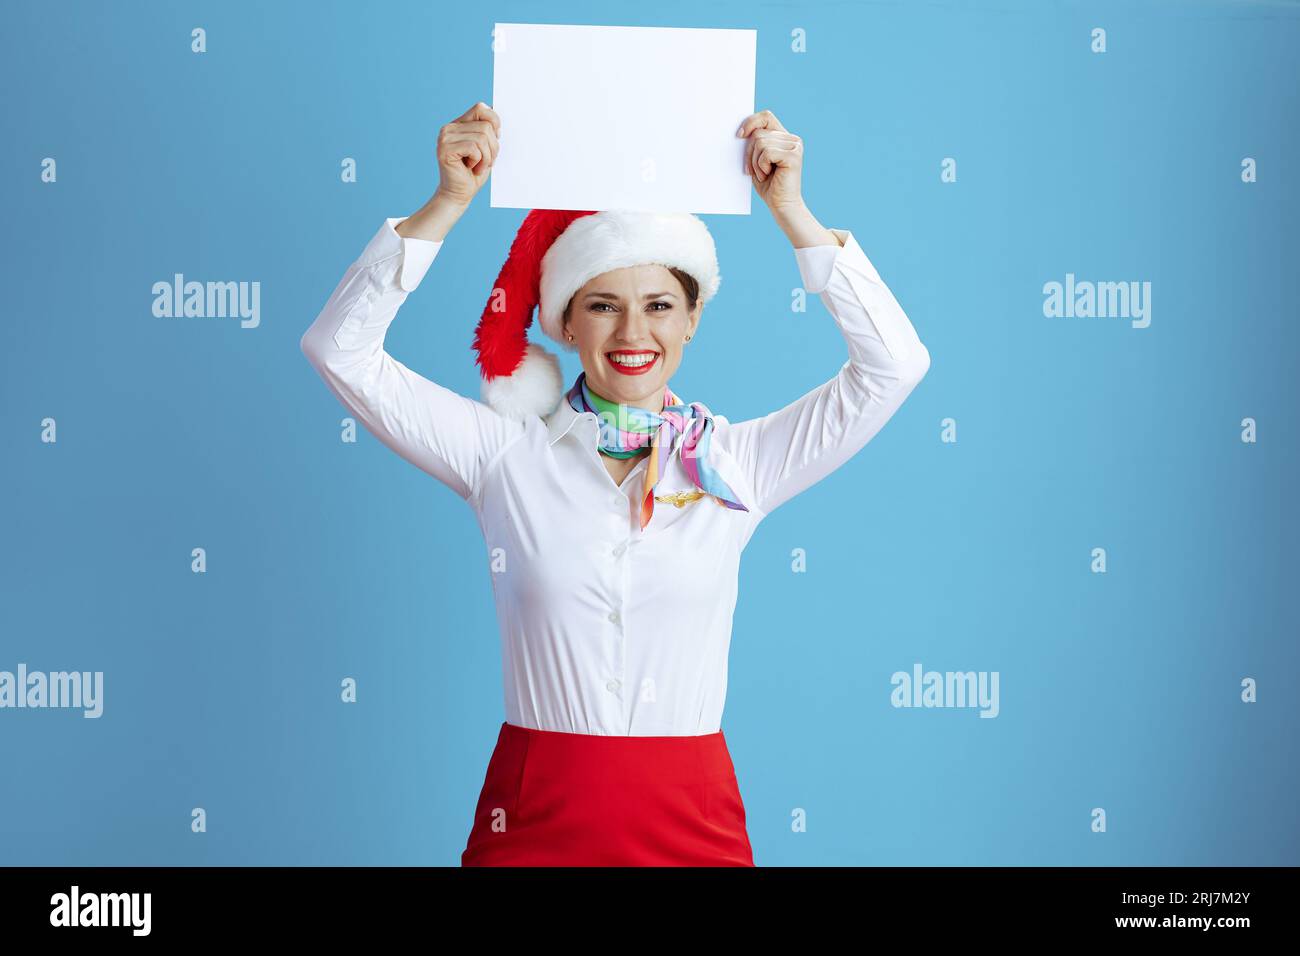 smiling modern female stewardess isolated on blue background in uniform with Santa hat showing blank a4 paper sheet. Stock Photo